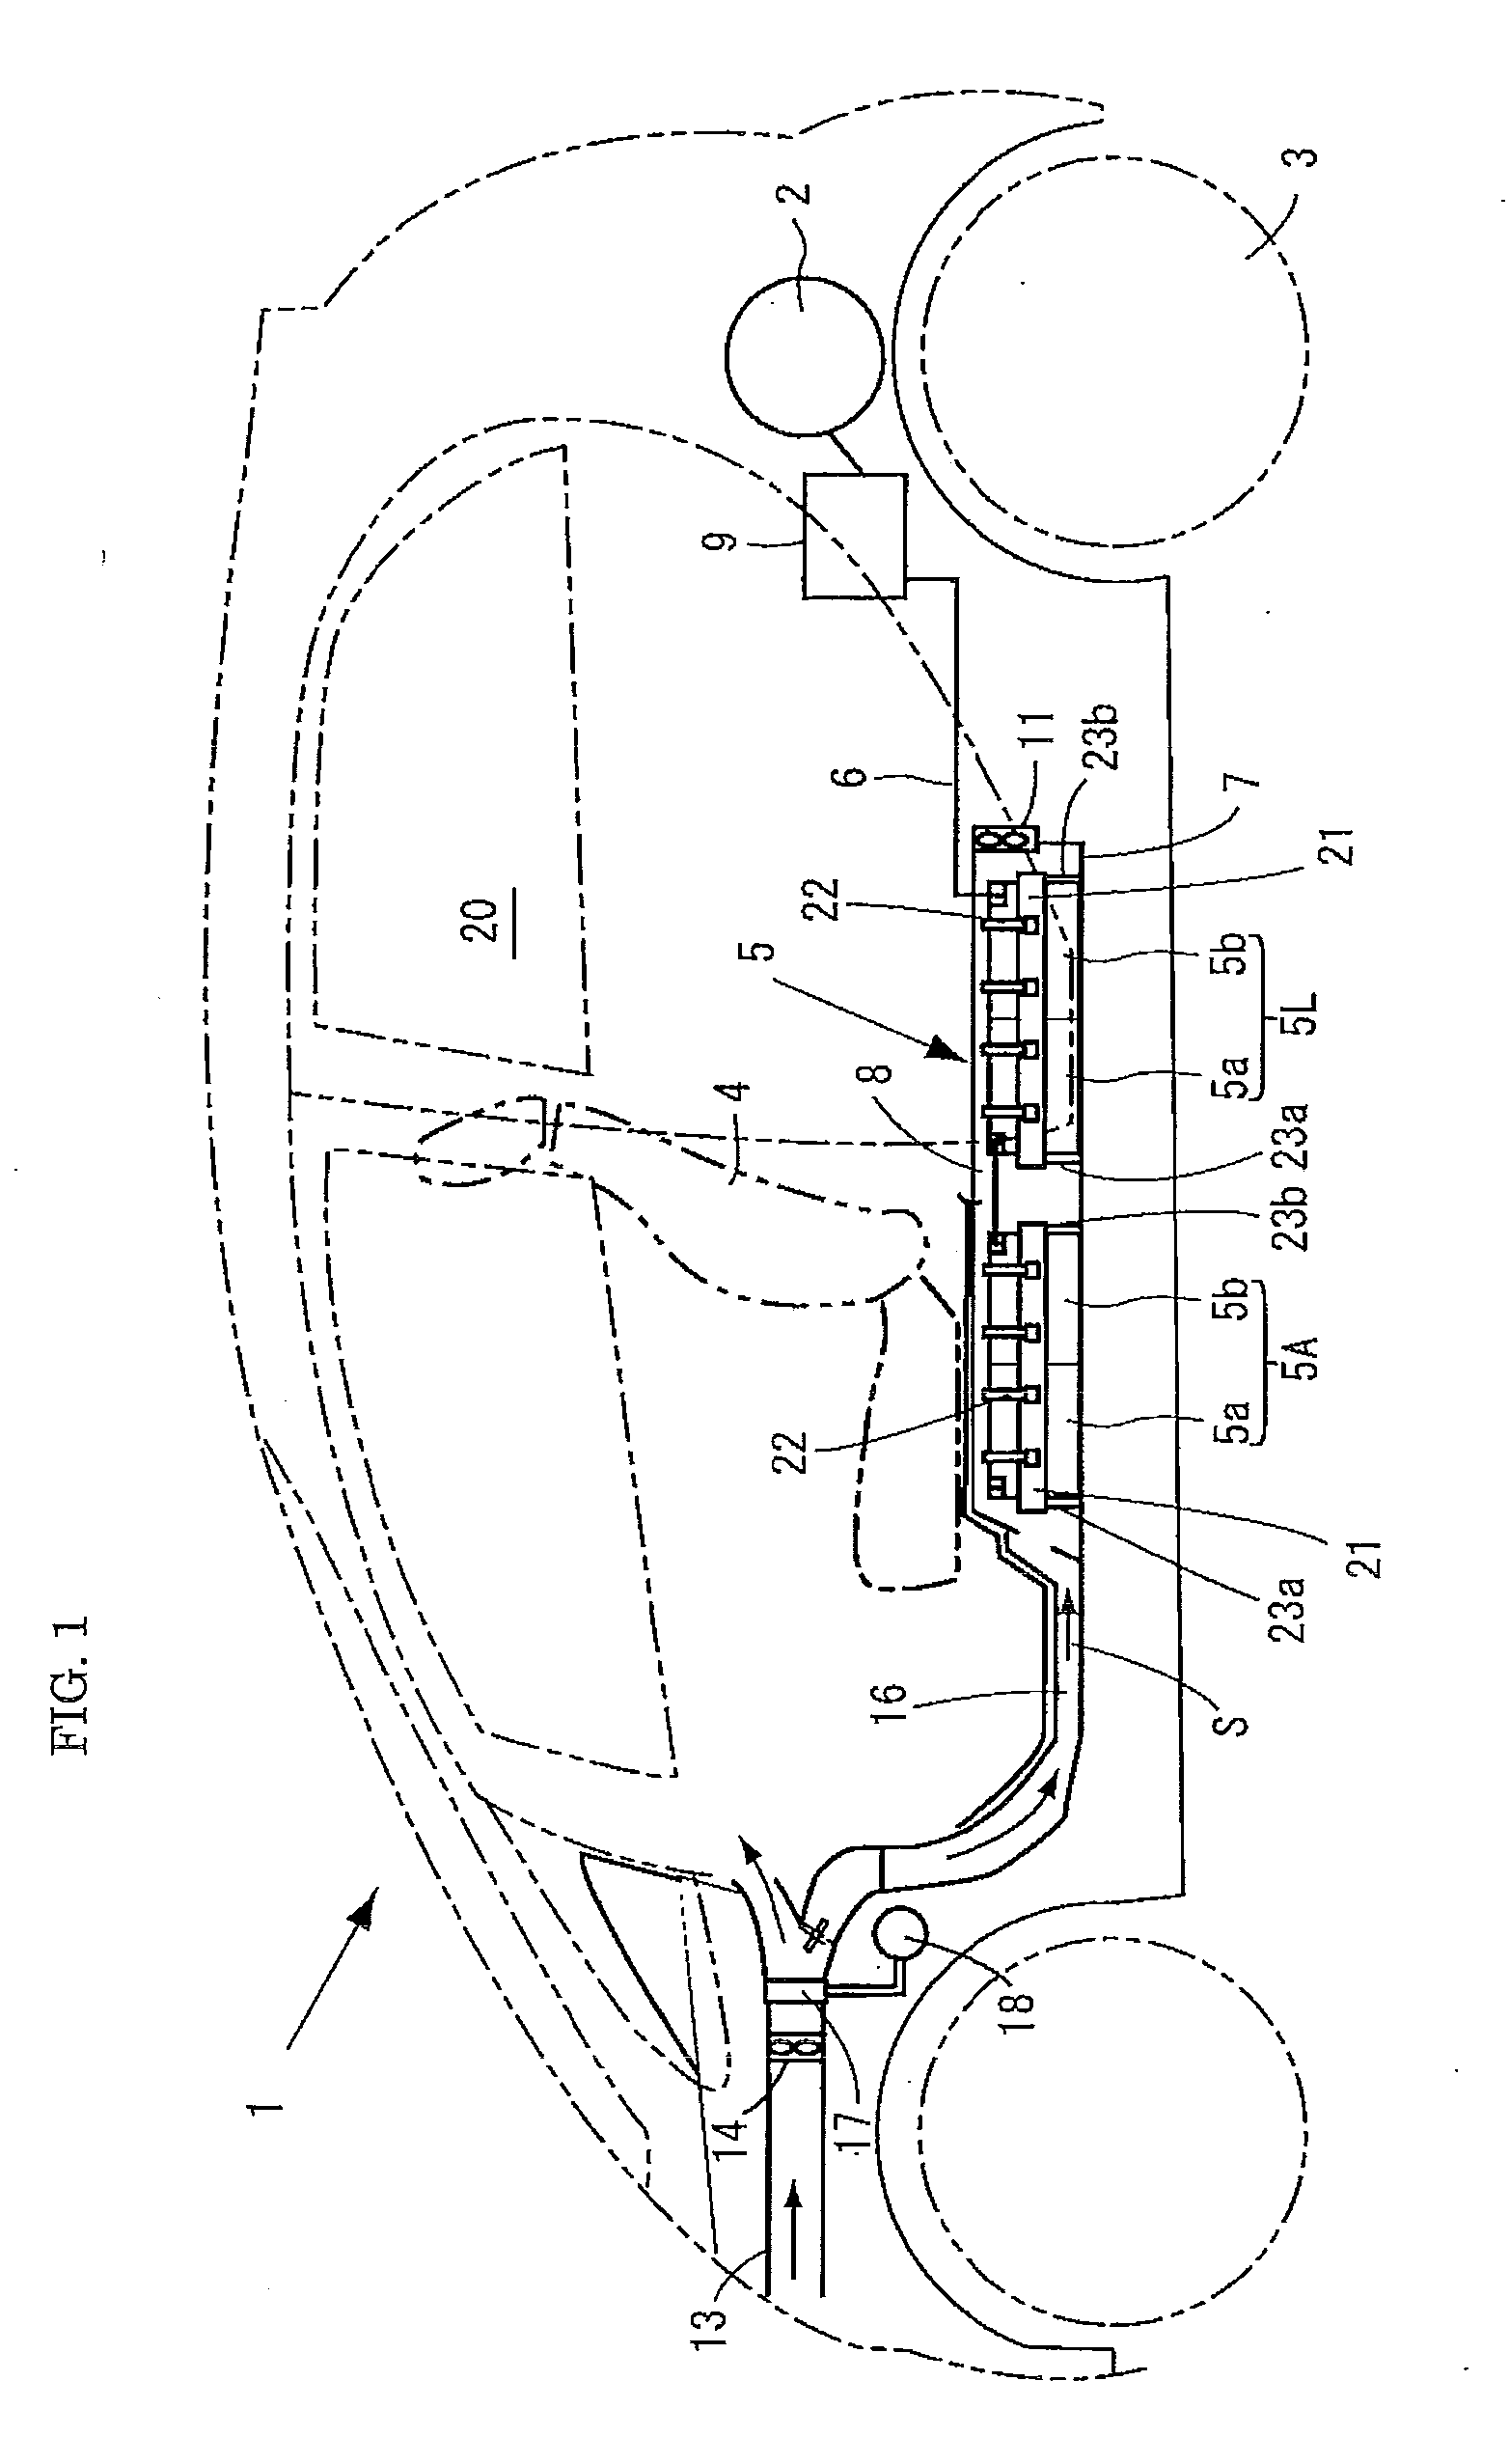 Battery positioning structure for electric vehicle